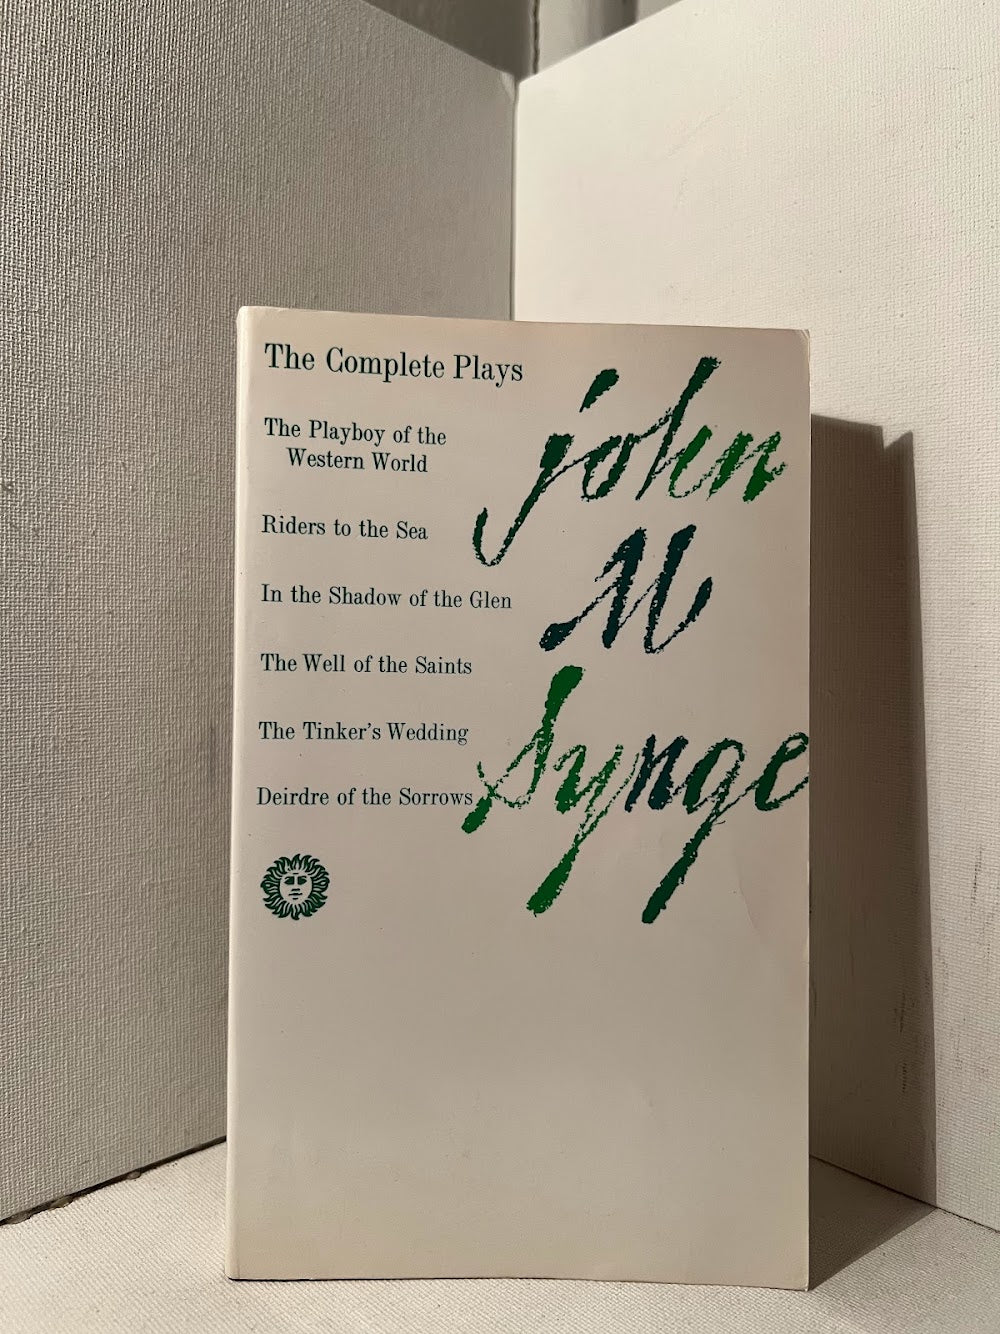 The Complete Plays by John Synge